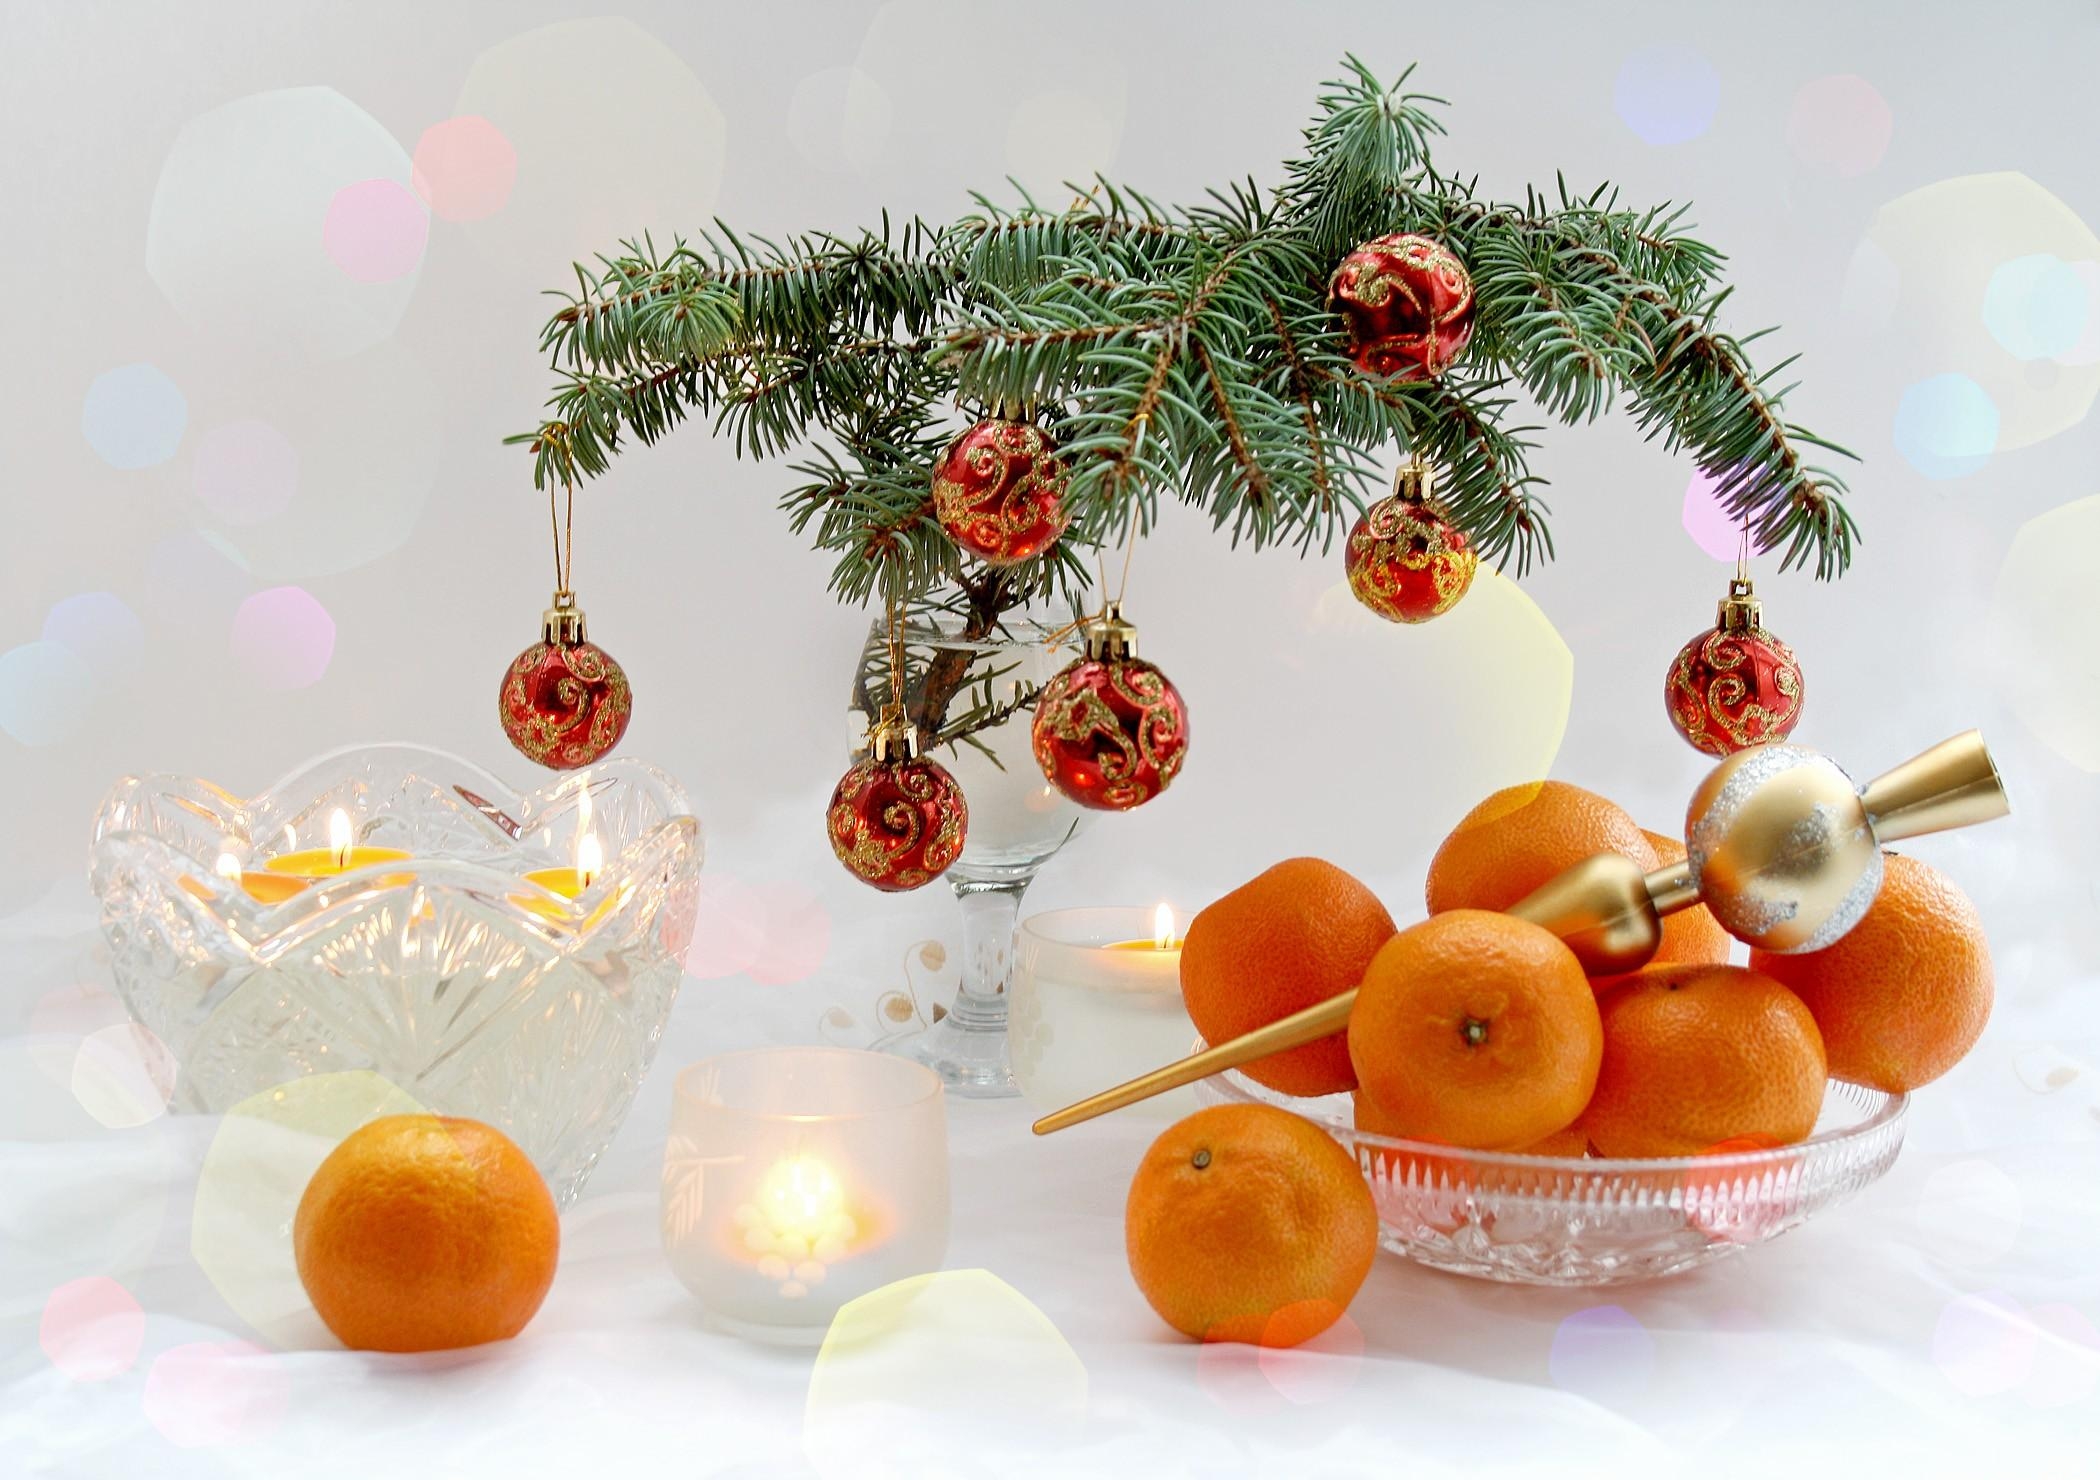 Cool Backgrounds candles, branch, new year, christmas Table